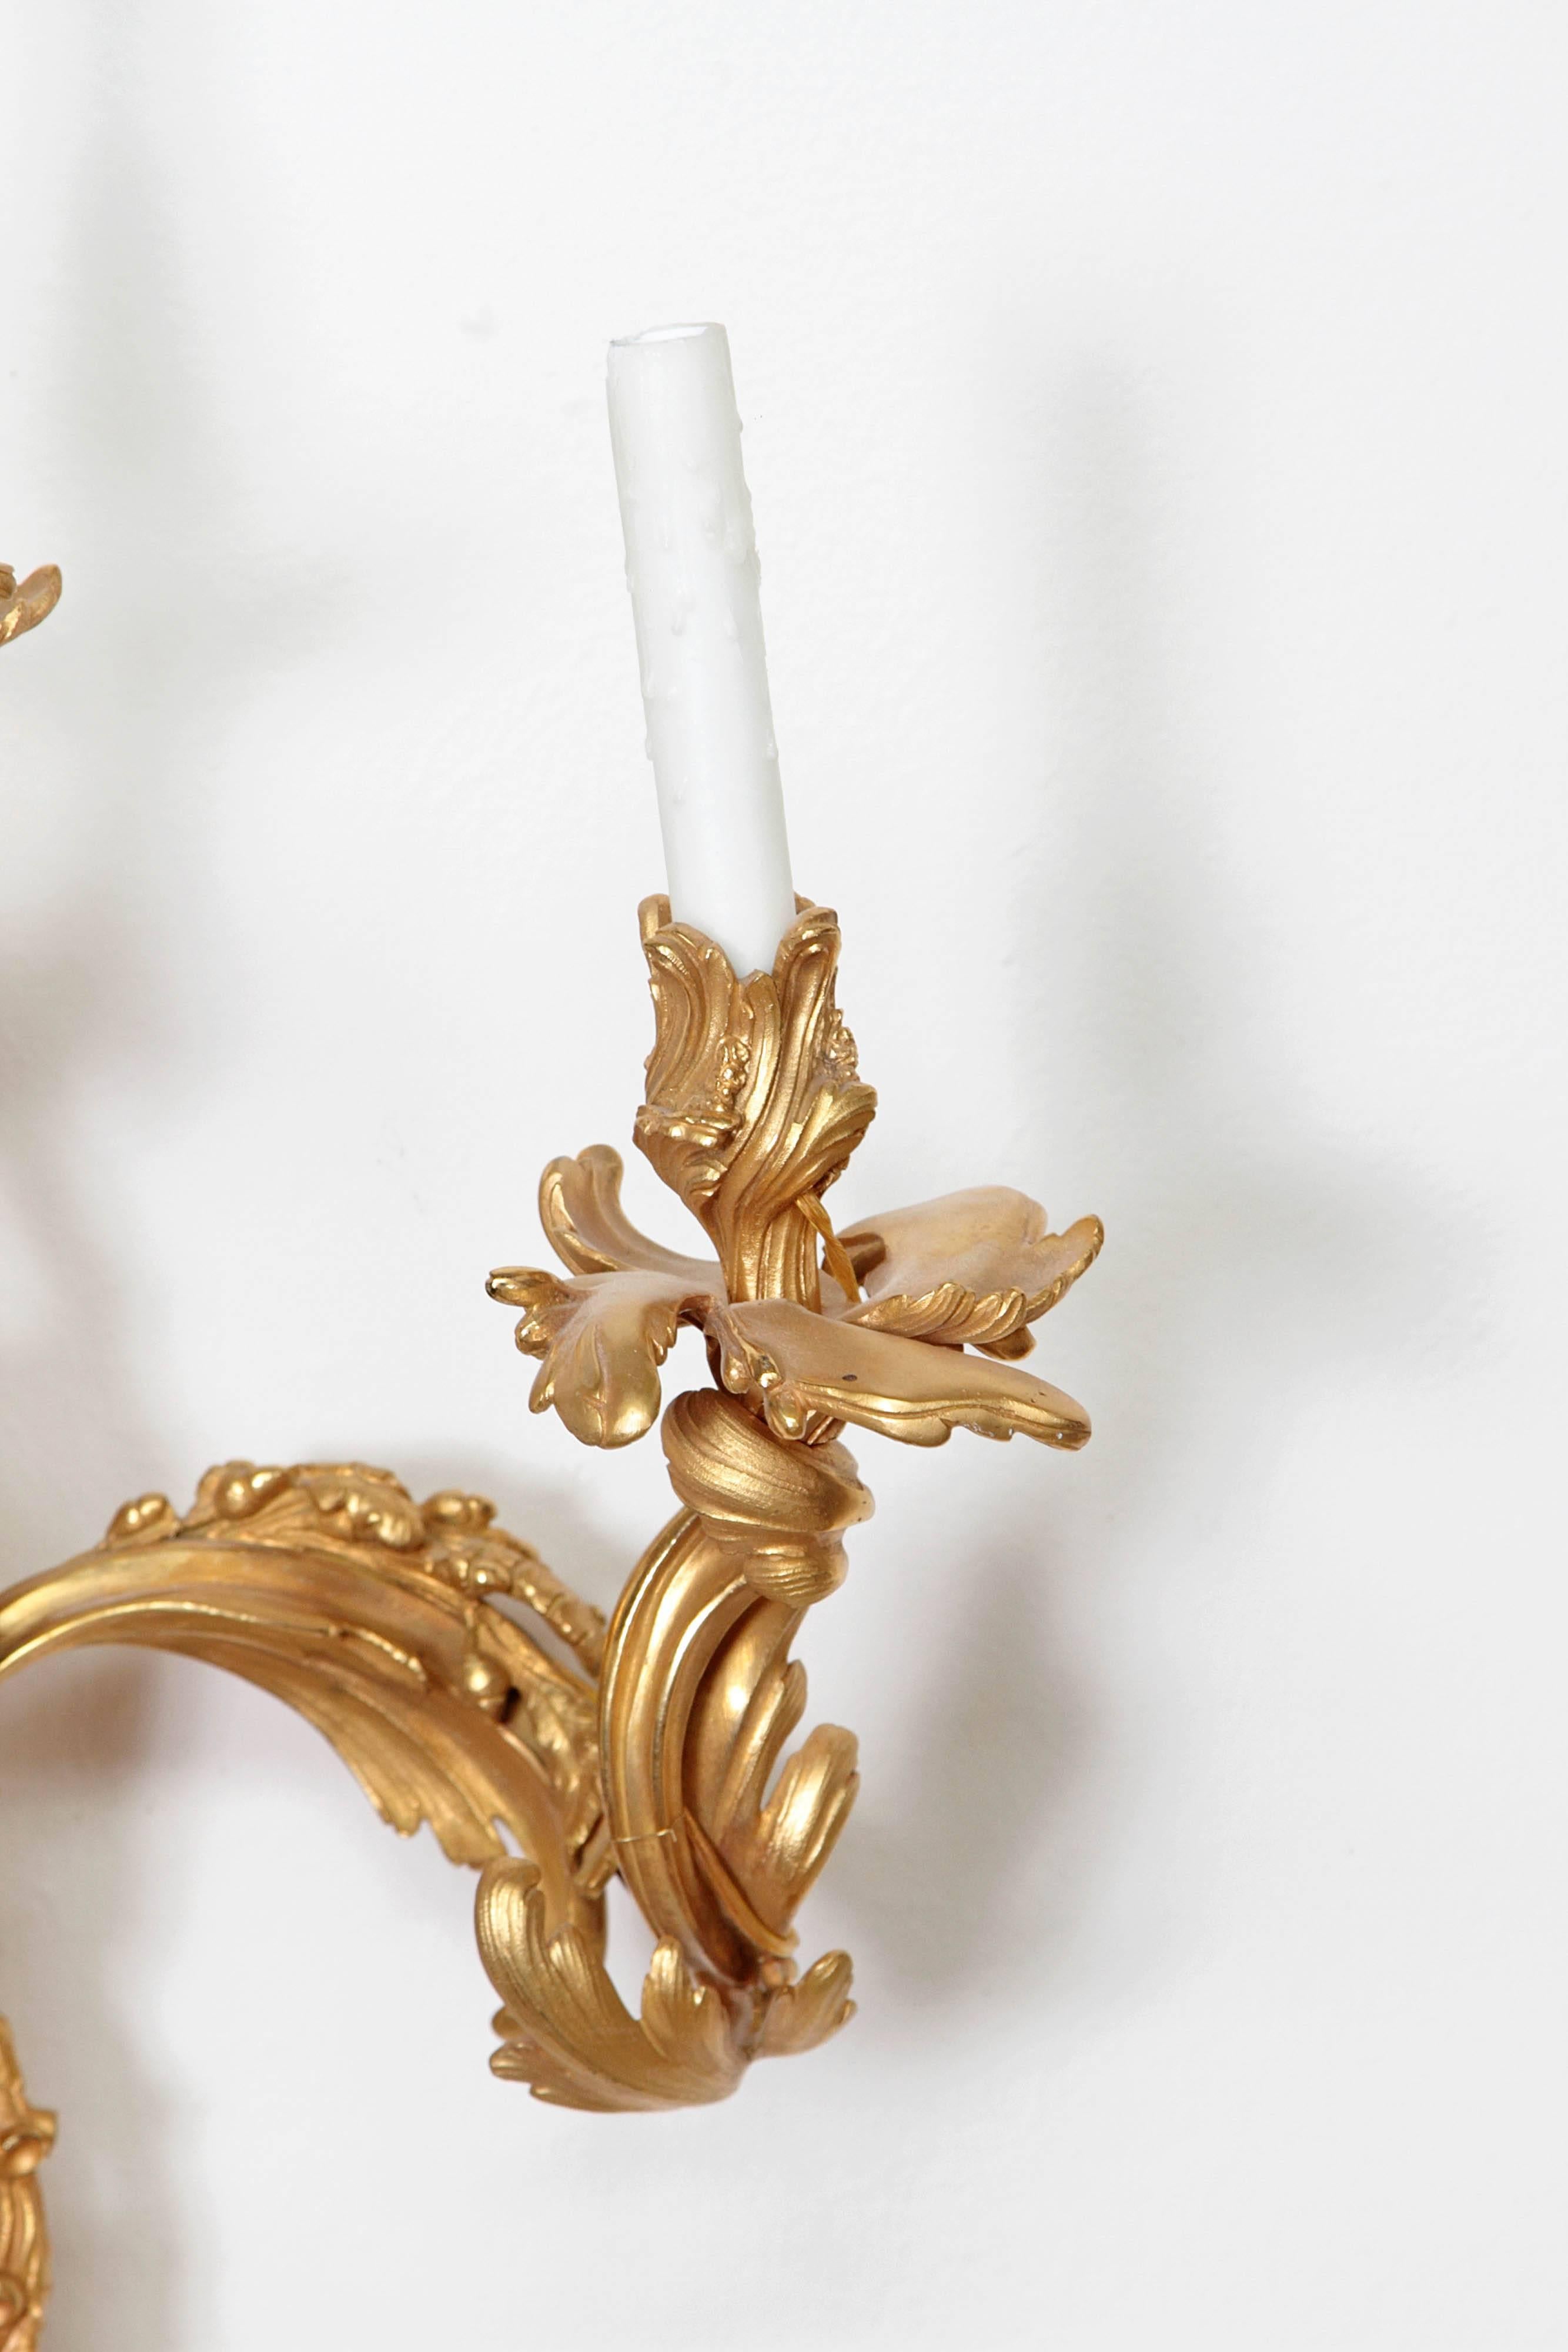 A pair of Louis XV-style doré bronze sconces, mercury gilded, burnished, foliate form, three lights with a putto at the base of each sconce. 19th century, circa 1880, France.

30